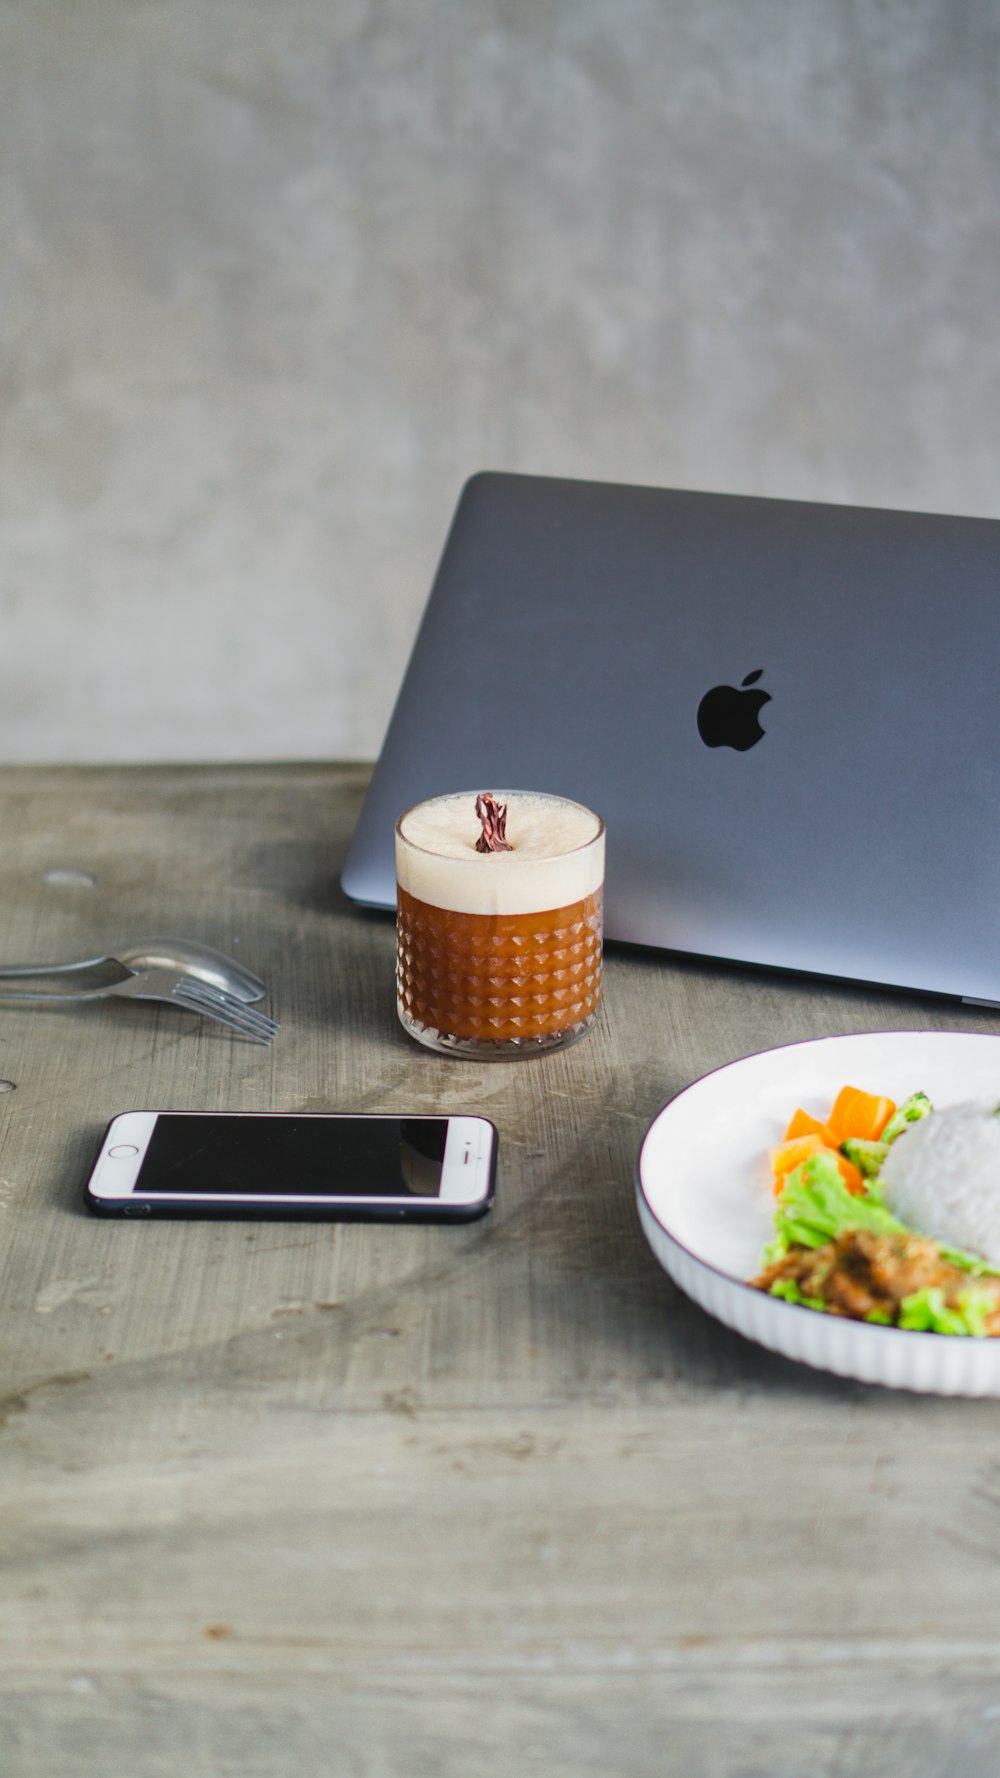 a table with a laptop and a bowl of food